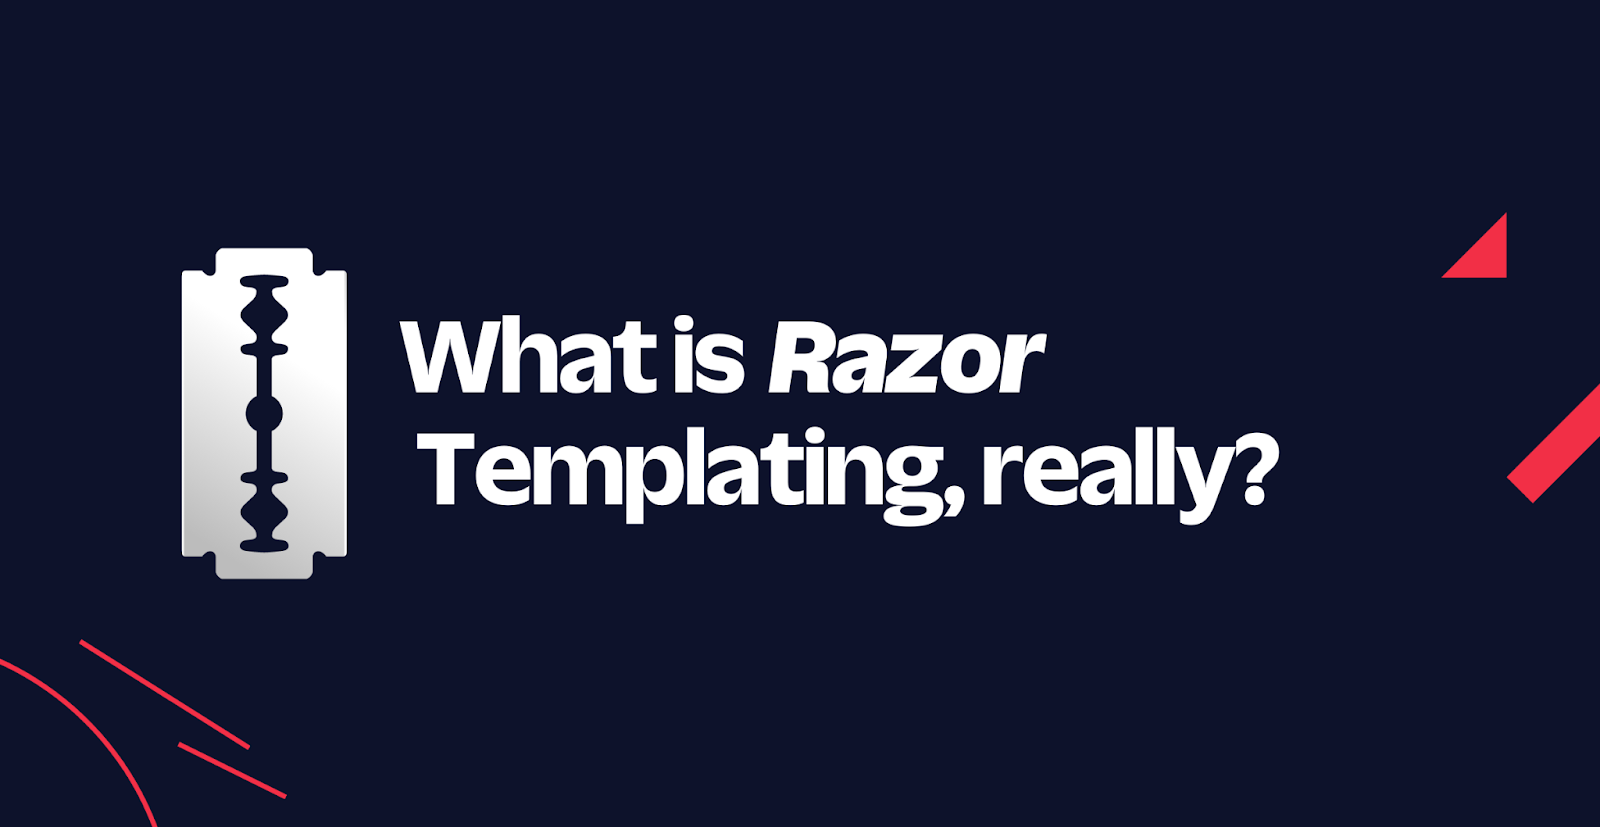 What is Razor Templating, really?